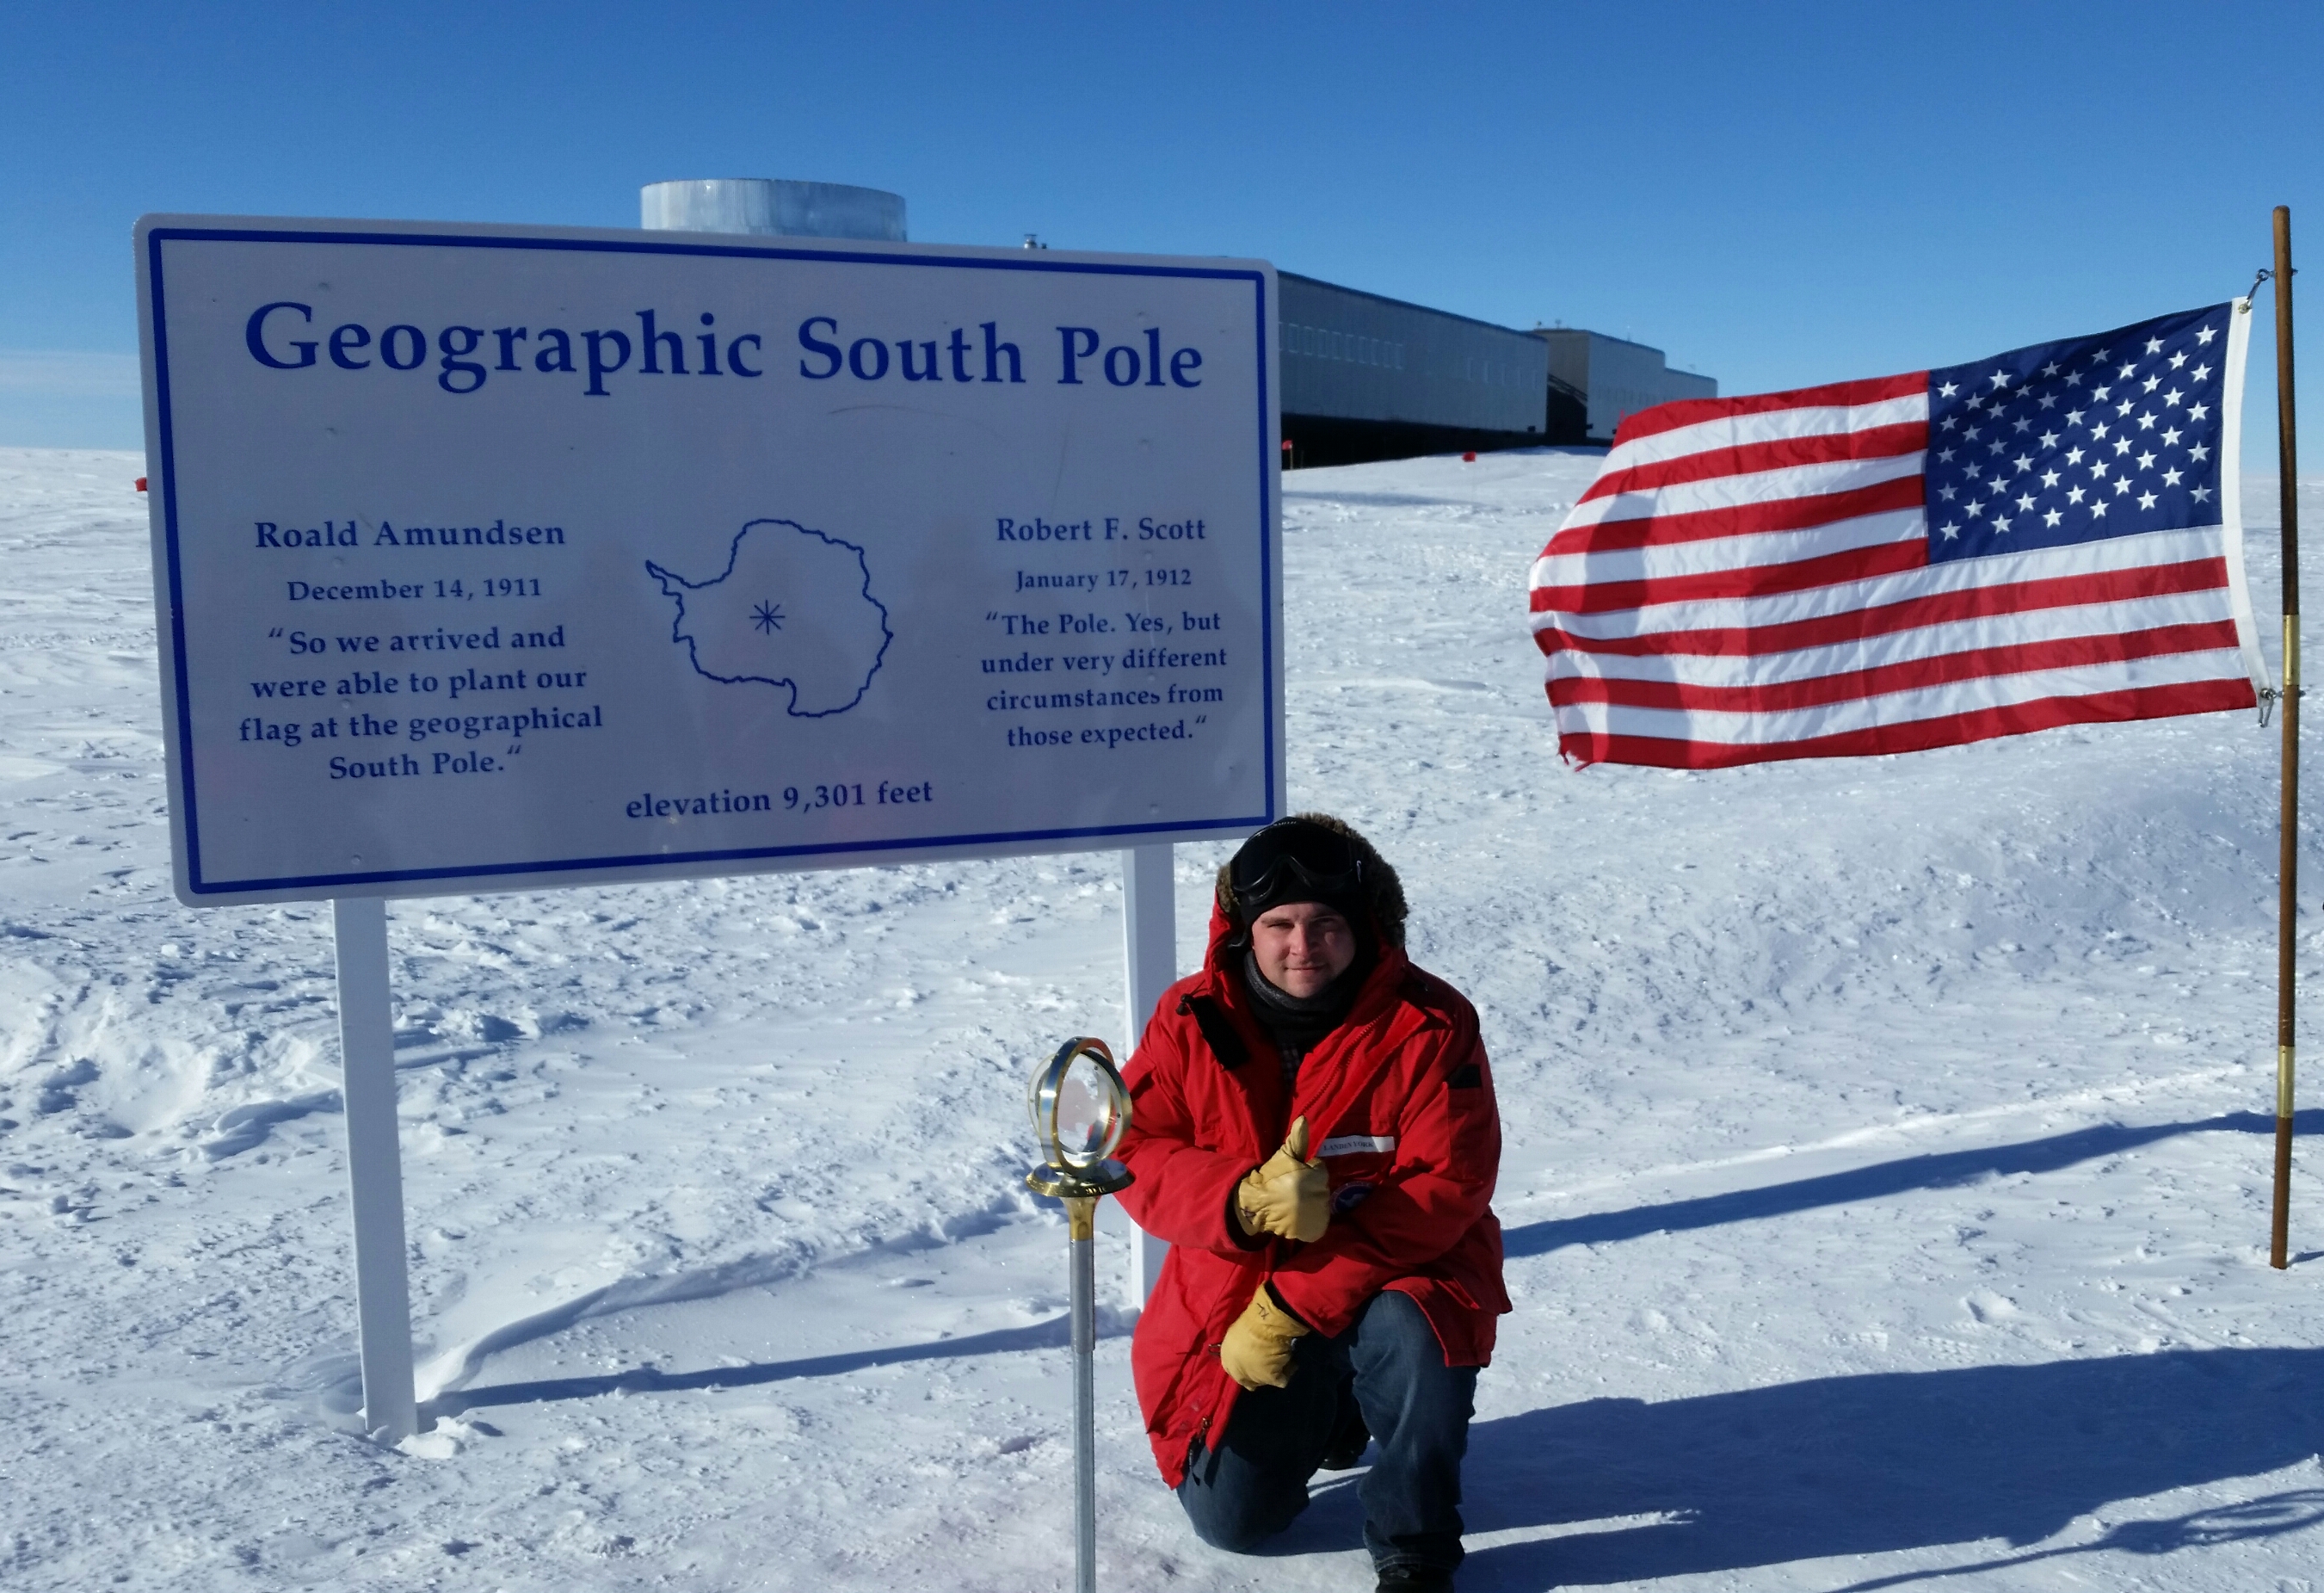 blue elephant - Geographic South Pole Robert F. Scon Roald Amundsen "So we arrived and were able to plant ou flag at the geographical South Pole The role is rut under very different sinpected elevation 9,301 feet